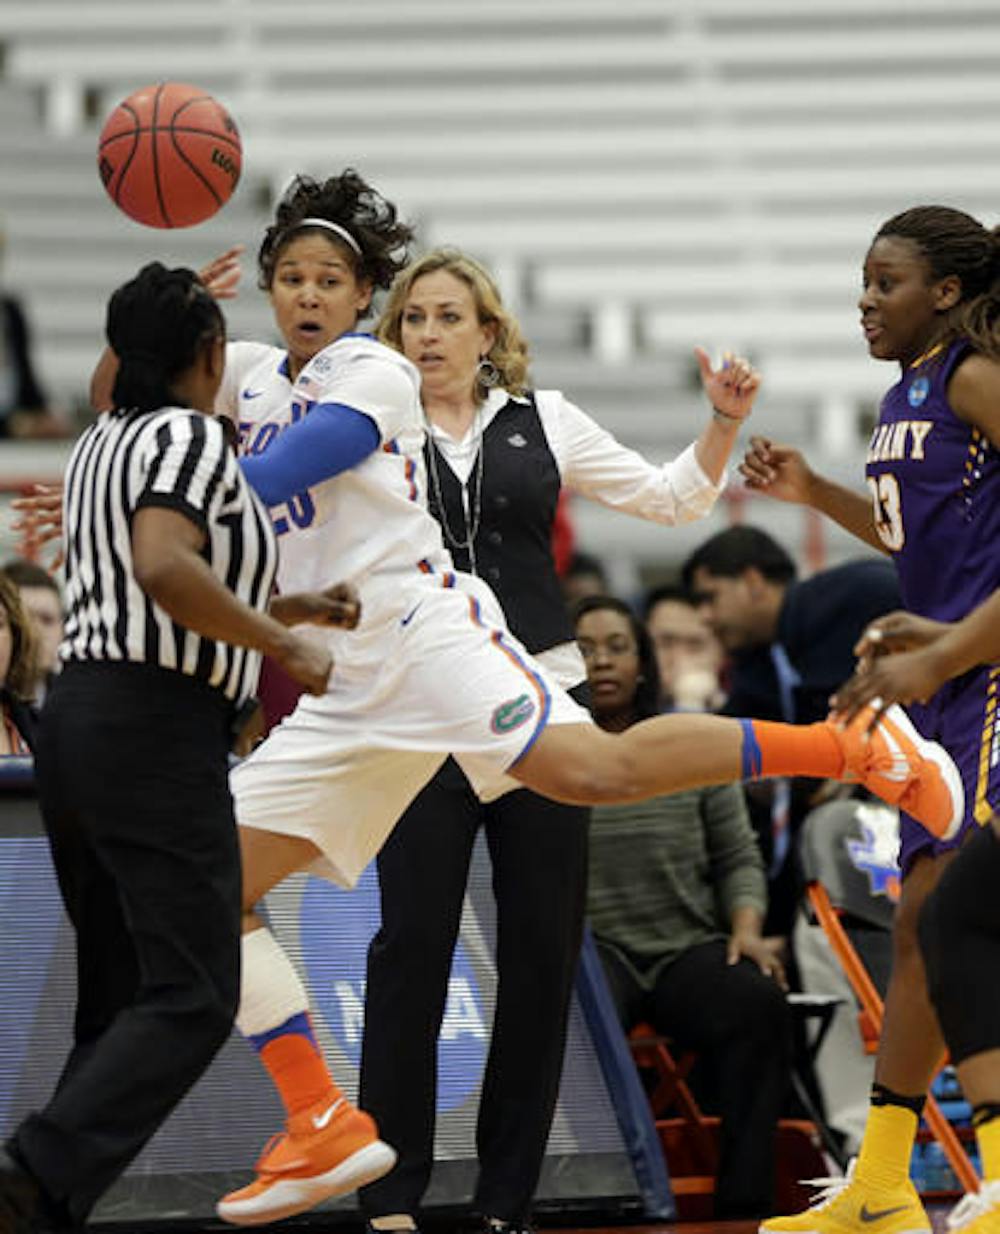 <p>Florida guard Simone Westbrook (20) keeps the ball in bounds in front of Florida head coach Amanda Butler during a first half of a first-round women's college basketball game against Albany in the NCAA Tournament on Friday, March 18, 2016, in Syracuse, N.Y. (AP Photo/Mike Groll)</p>